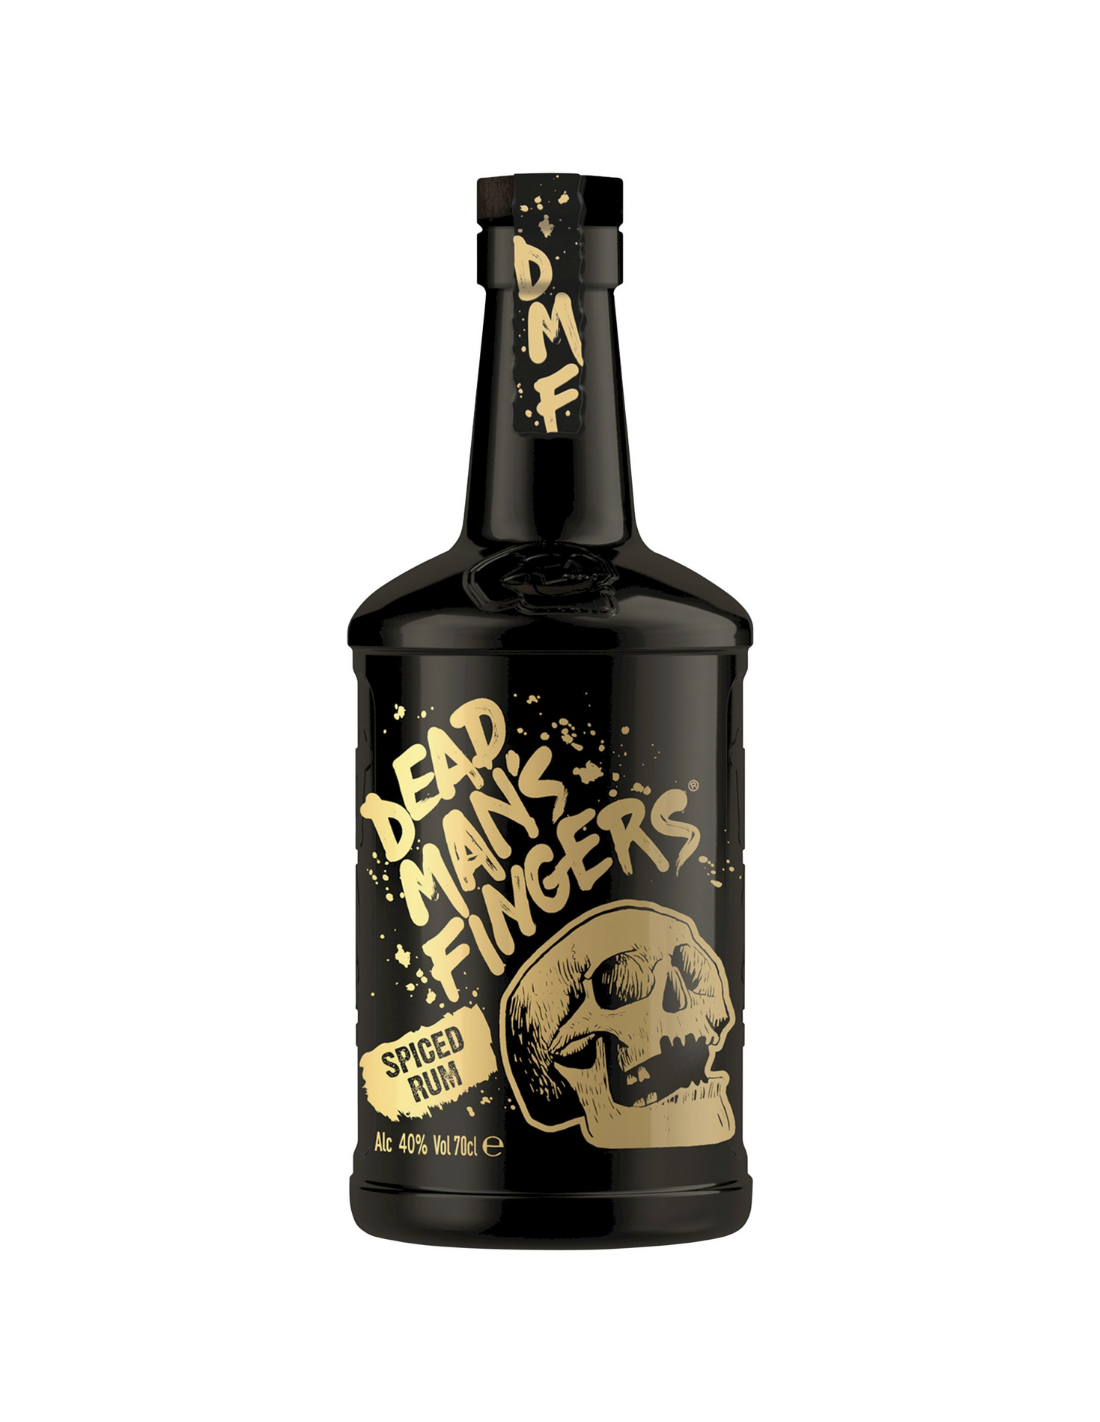 Rom Dead Man’s Fingers Spiced, 37.5% alc., 0.7L, Anglia alcooldiscount.ro